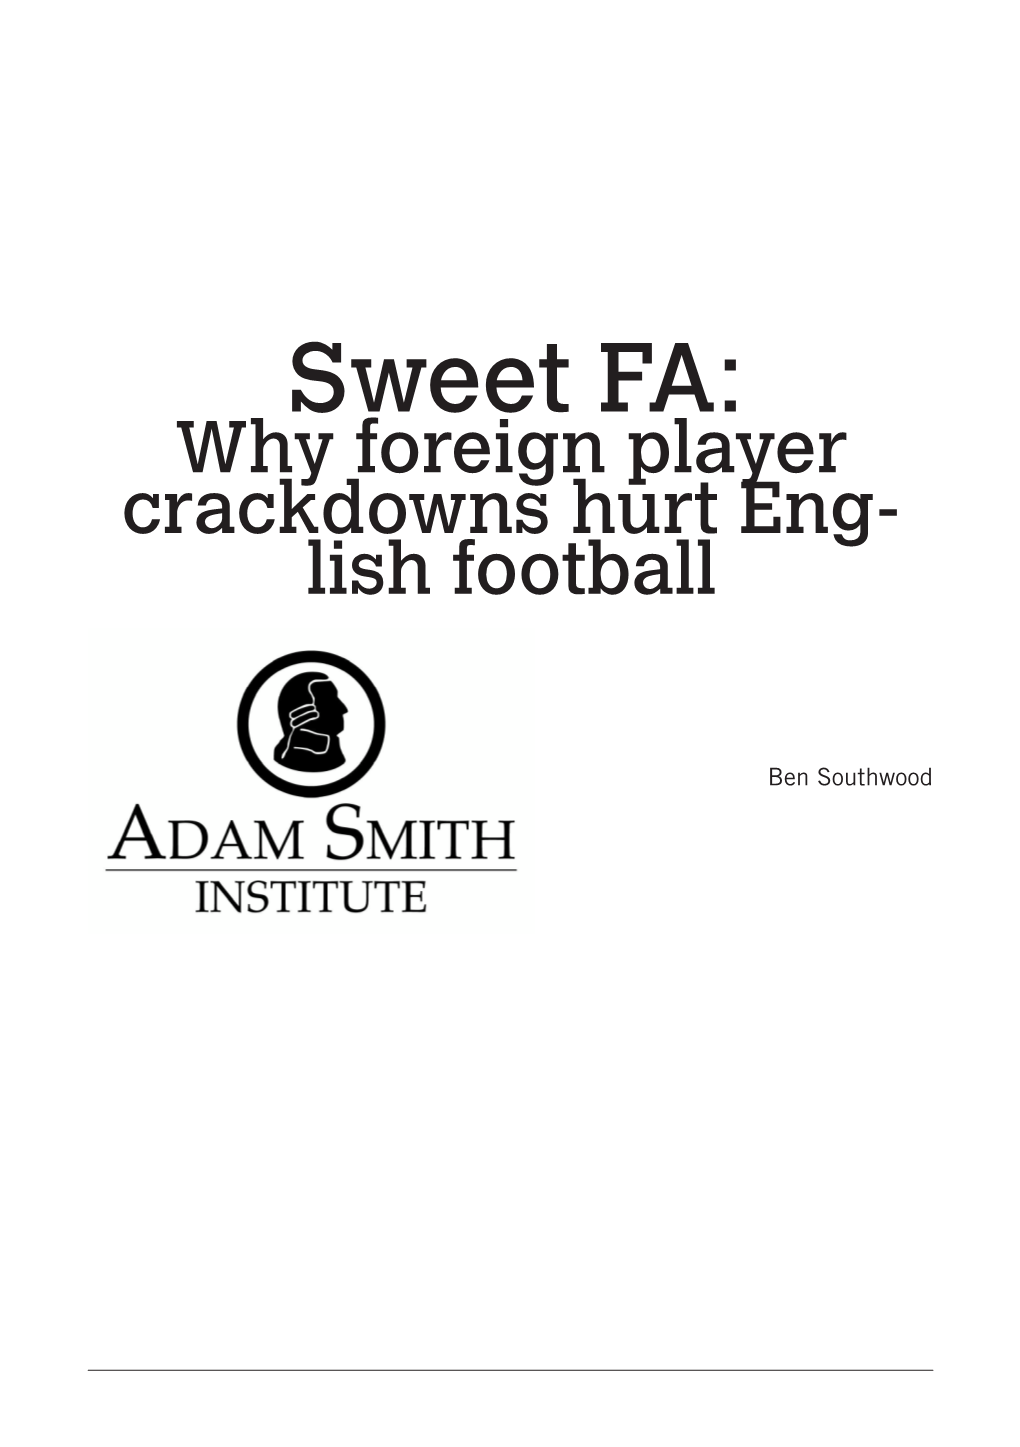 Sweet FA: Why Foreign Player Crackdowns Hurt Eng- Lish Football